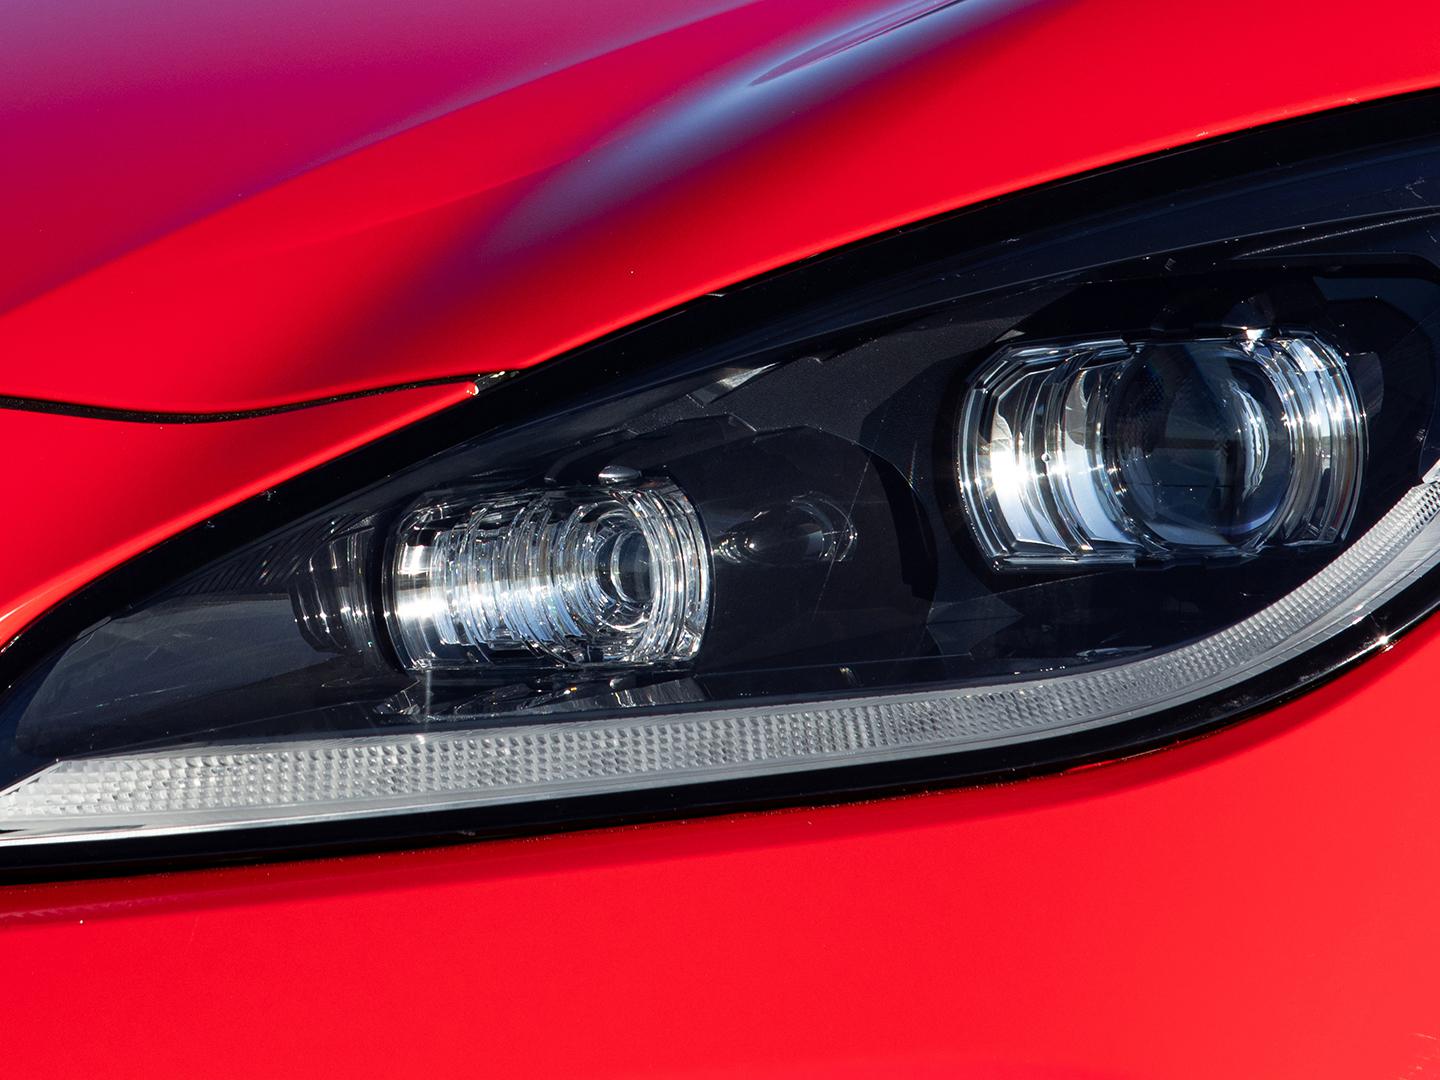 A new sports car will be revealed by Toyota on June 2.